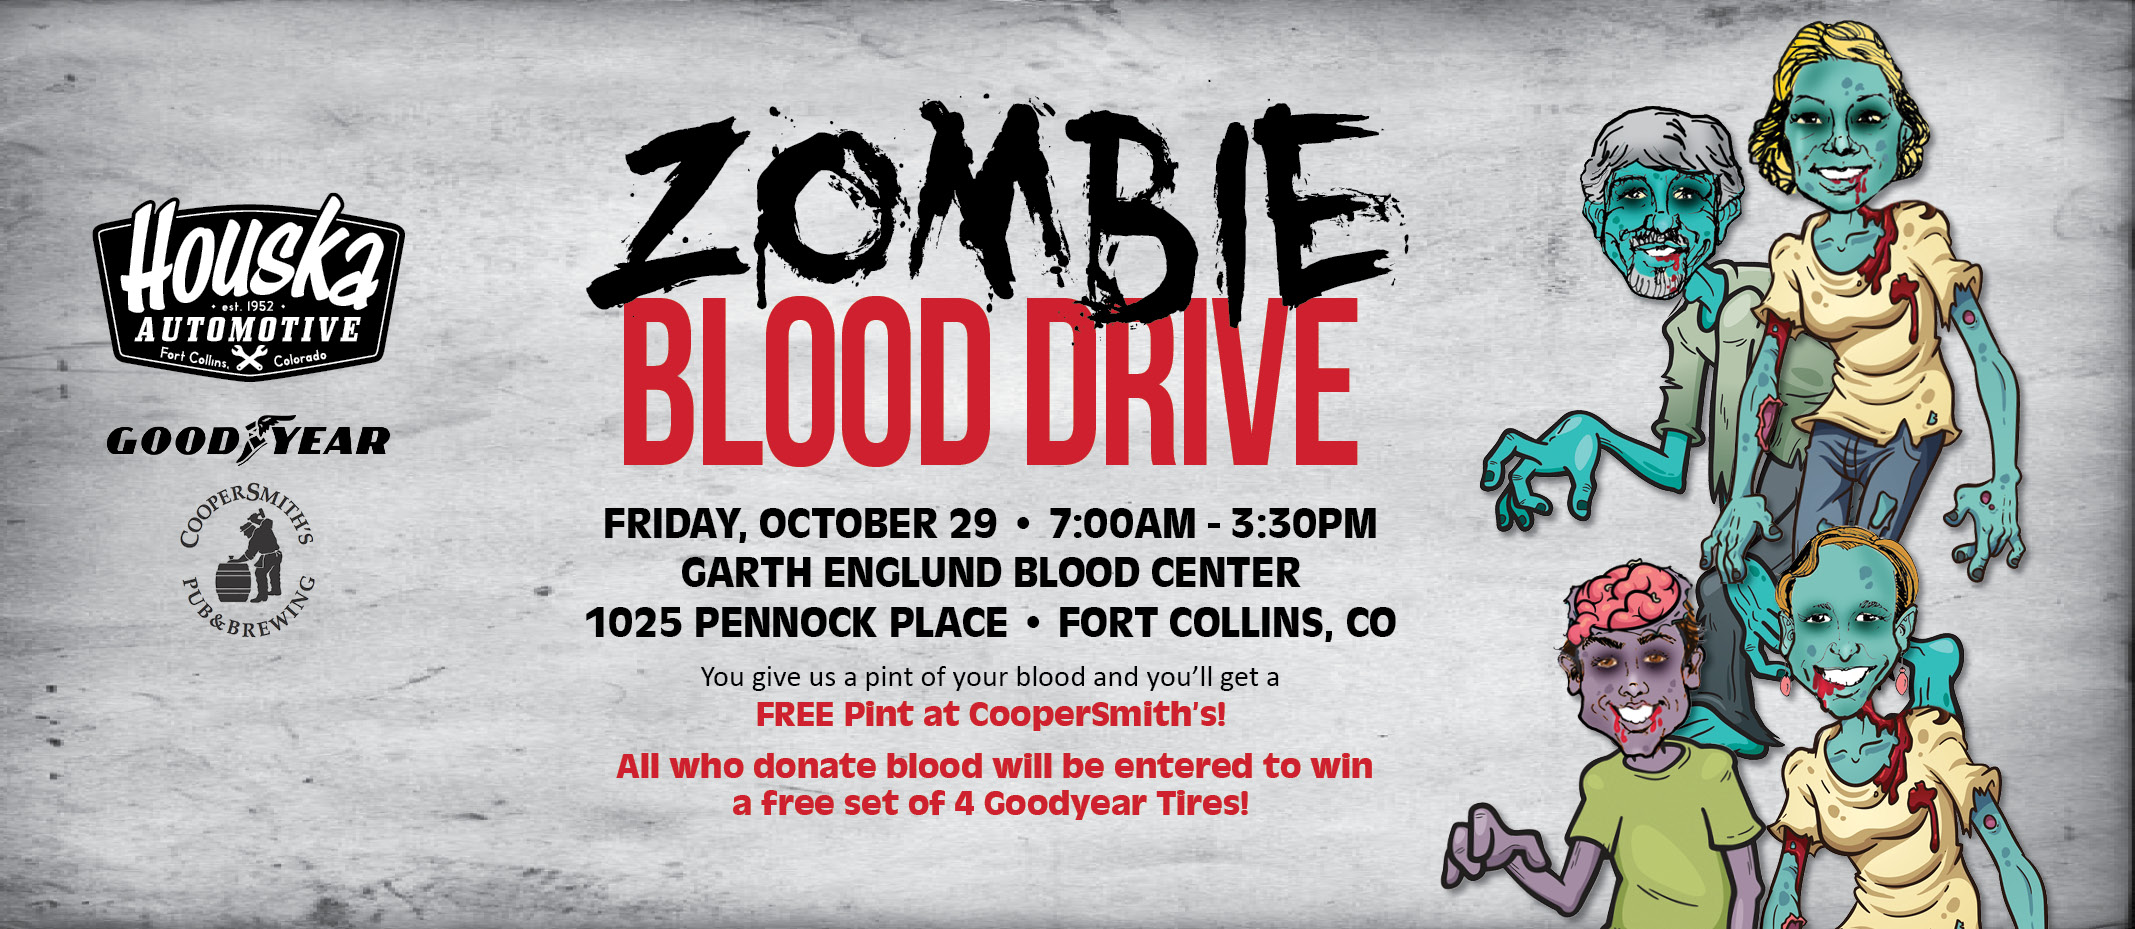 Zombie Blood drive banner with cartoon zombies and logos